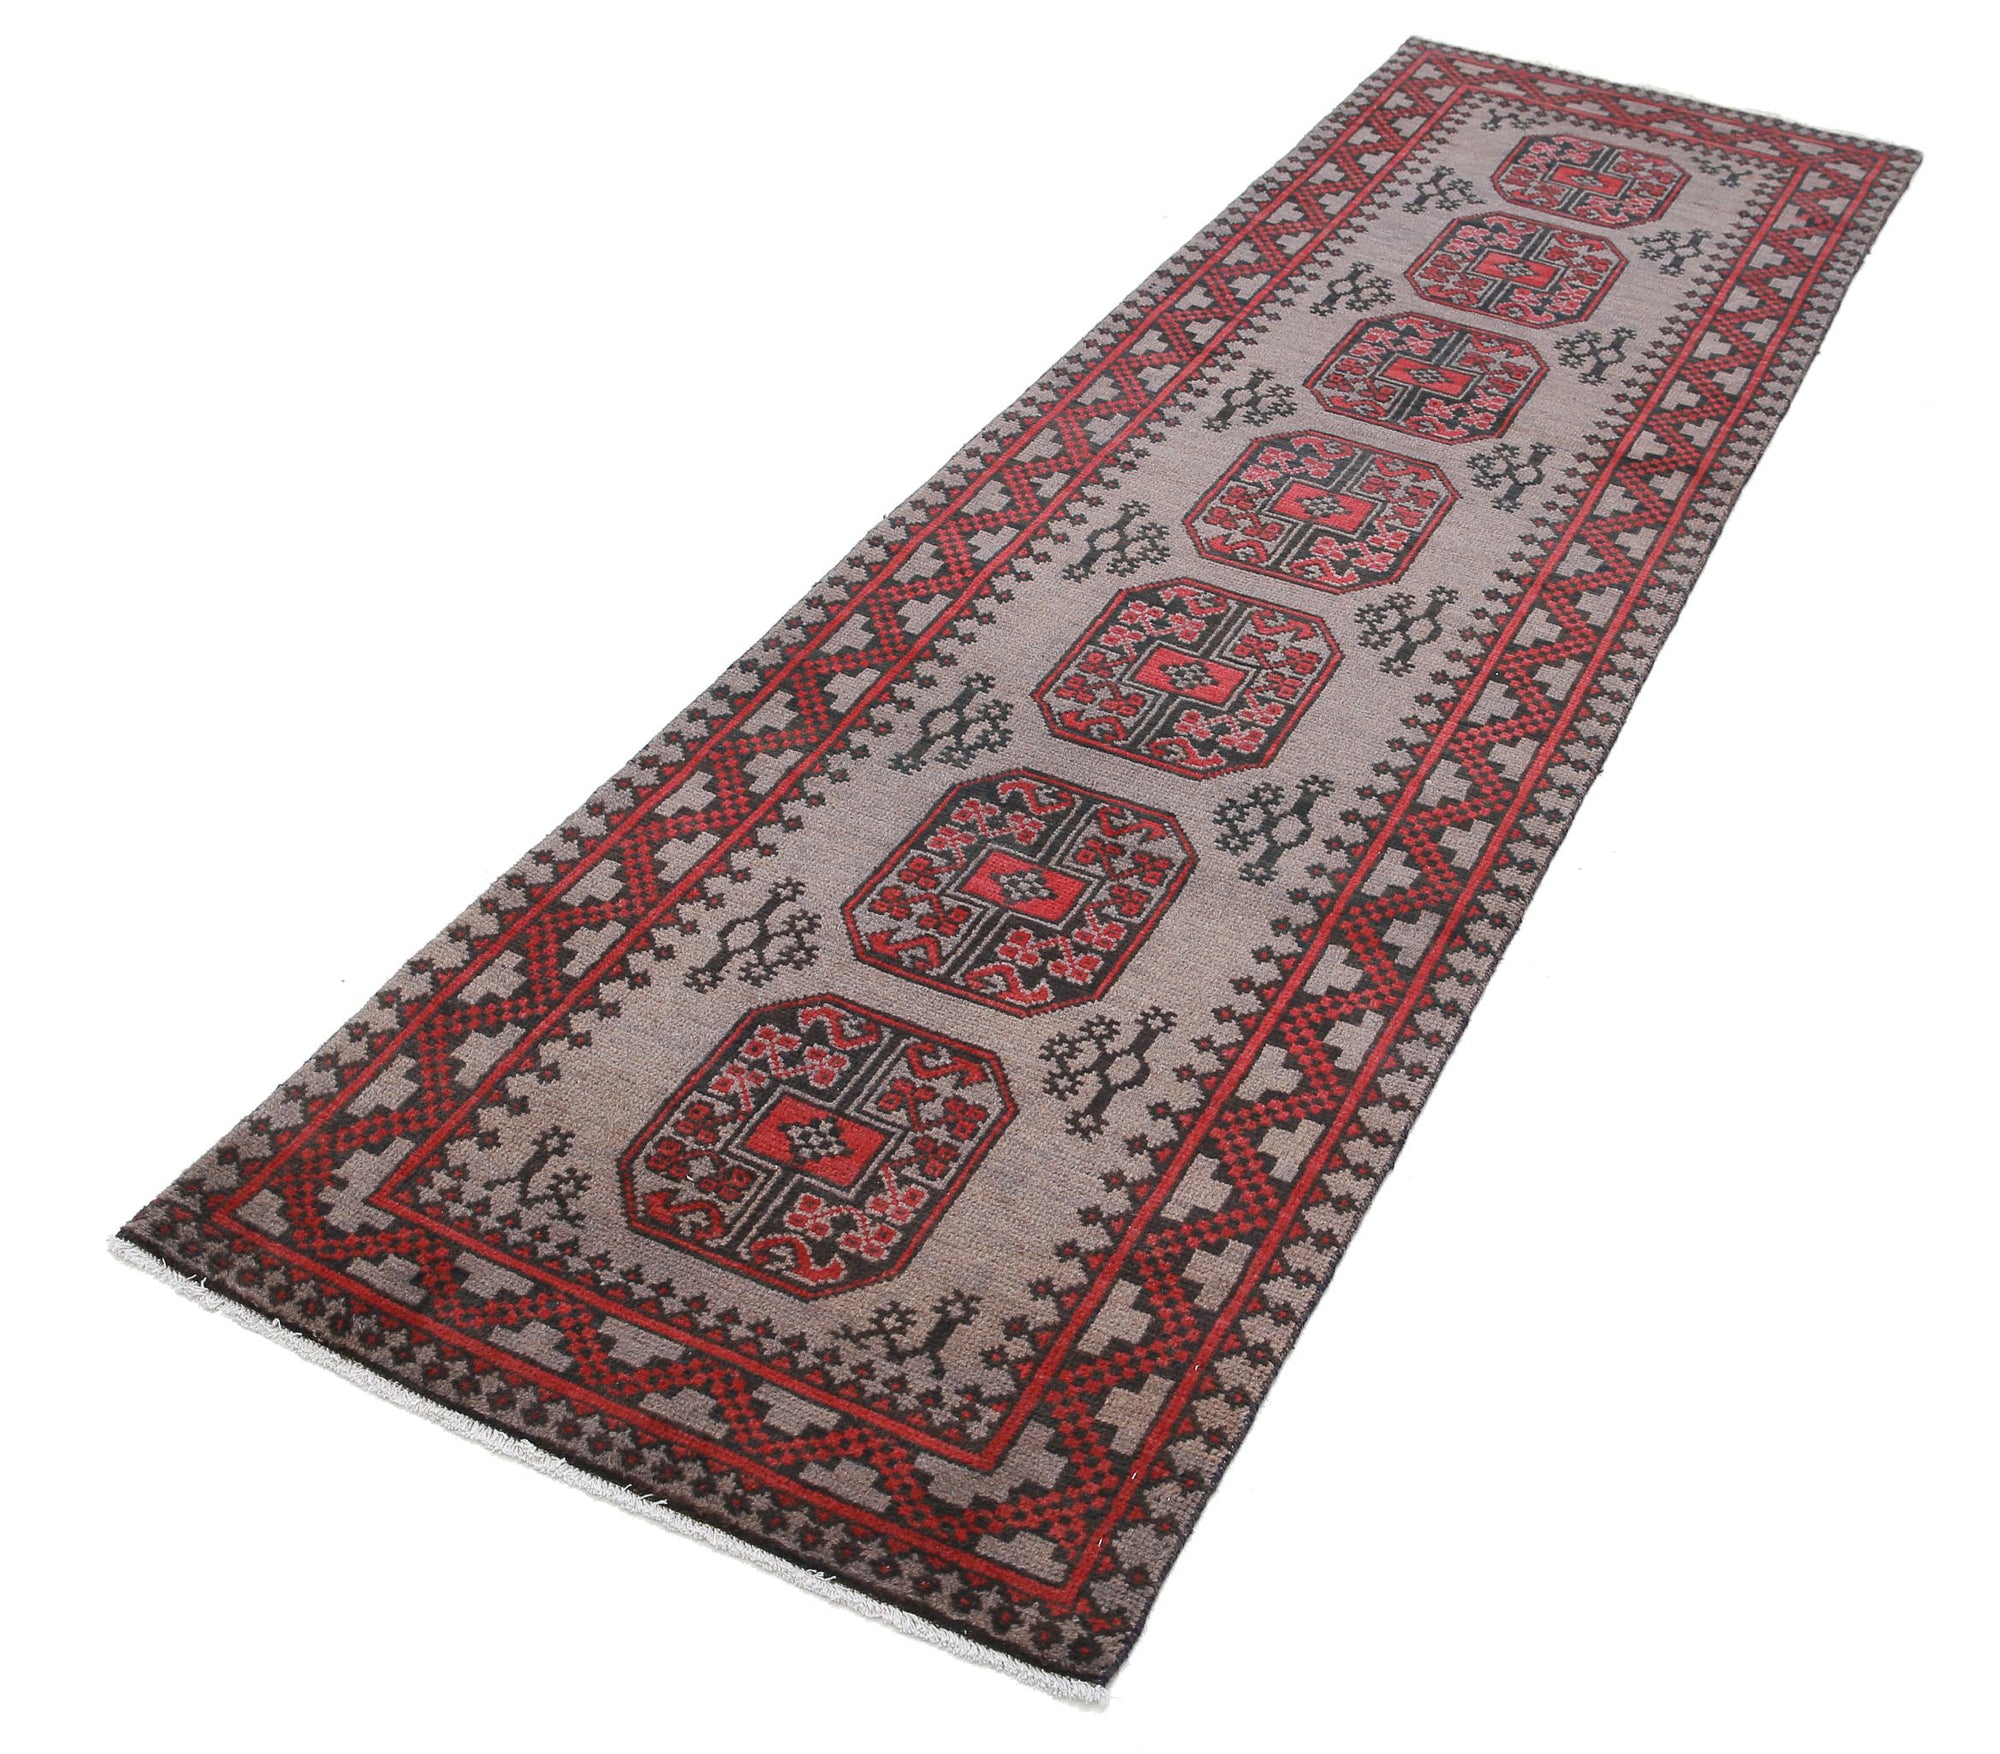 Revival-hand-knotted-gul-collection-wool-rug-5013996-2.jpg